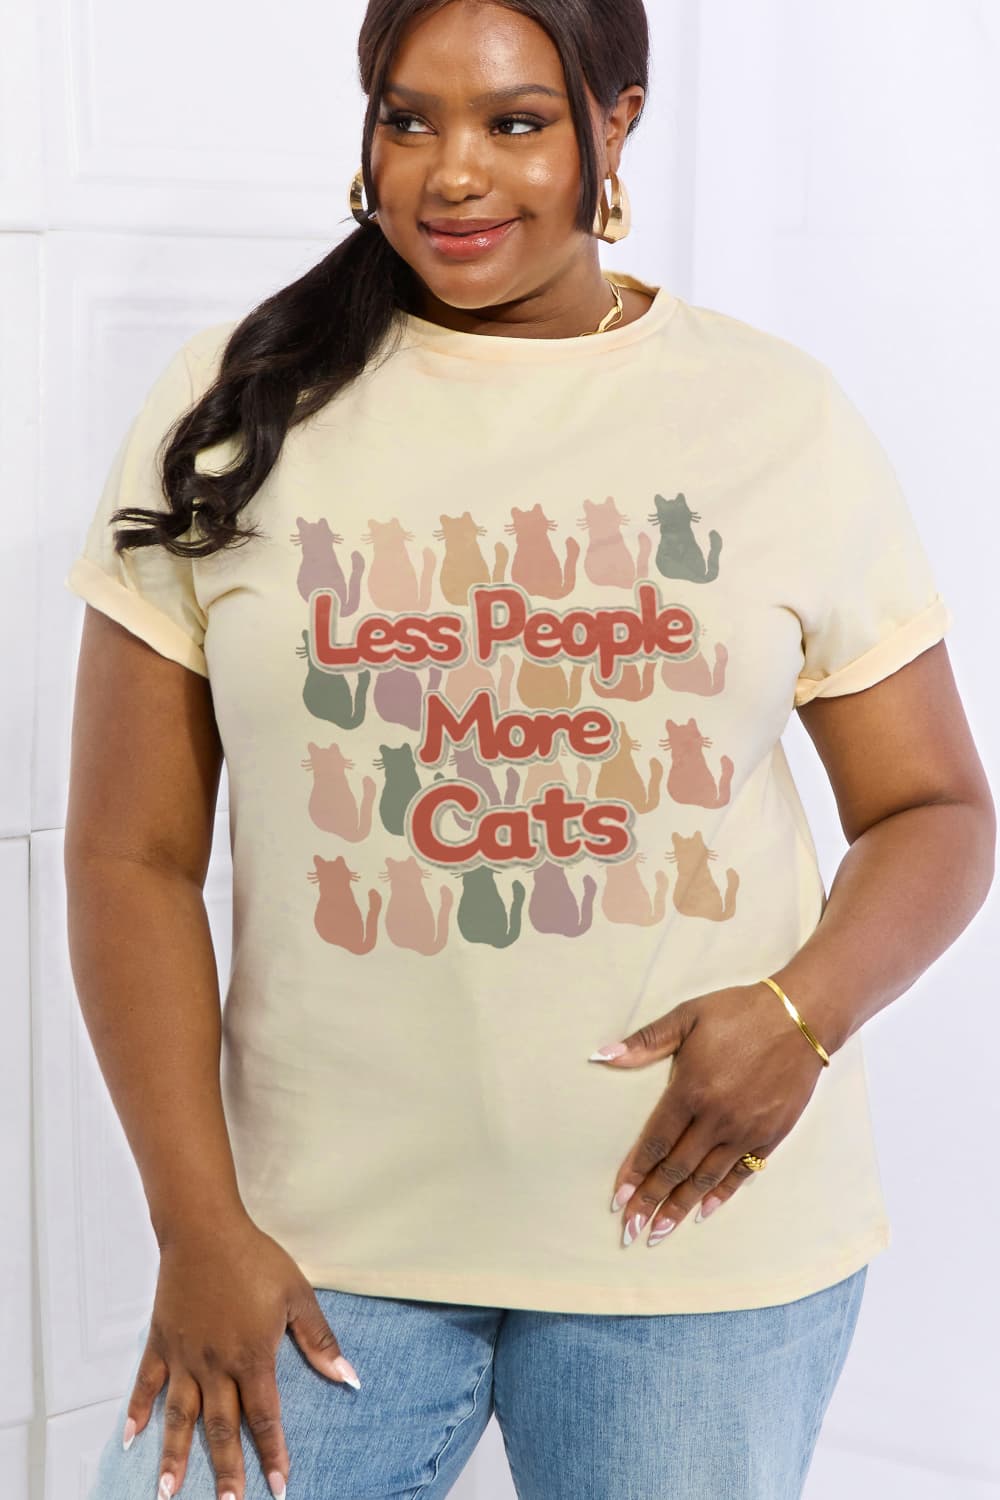 LESS PEOPLE MORE CATS Graphic Cotton Tee - T-Shirts - Shirts & Tops - 17 - 2024